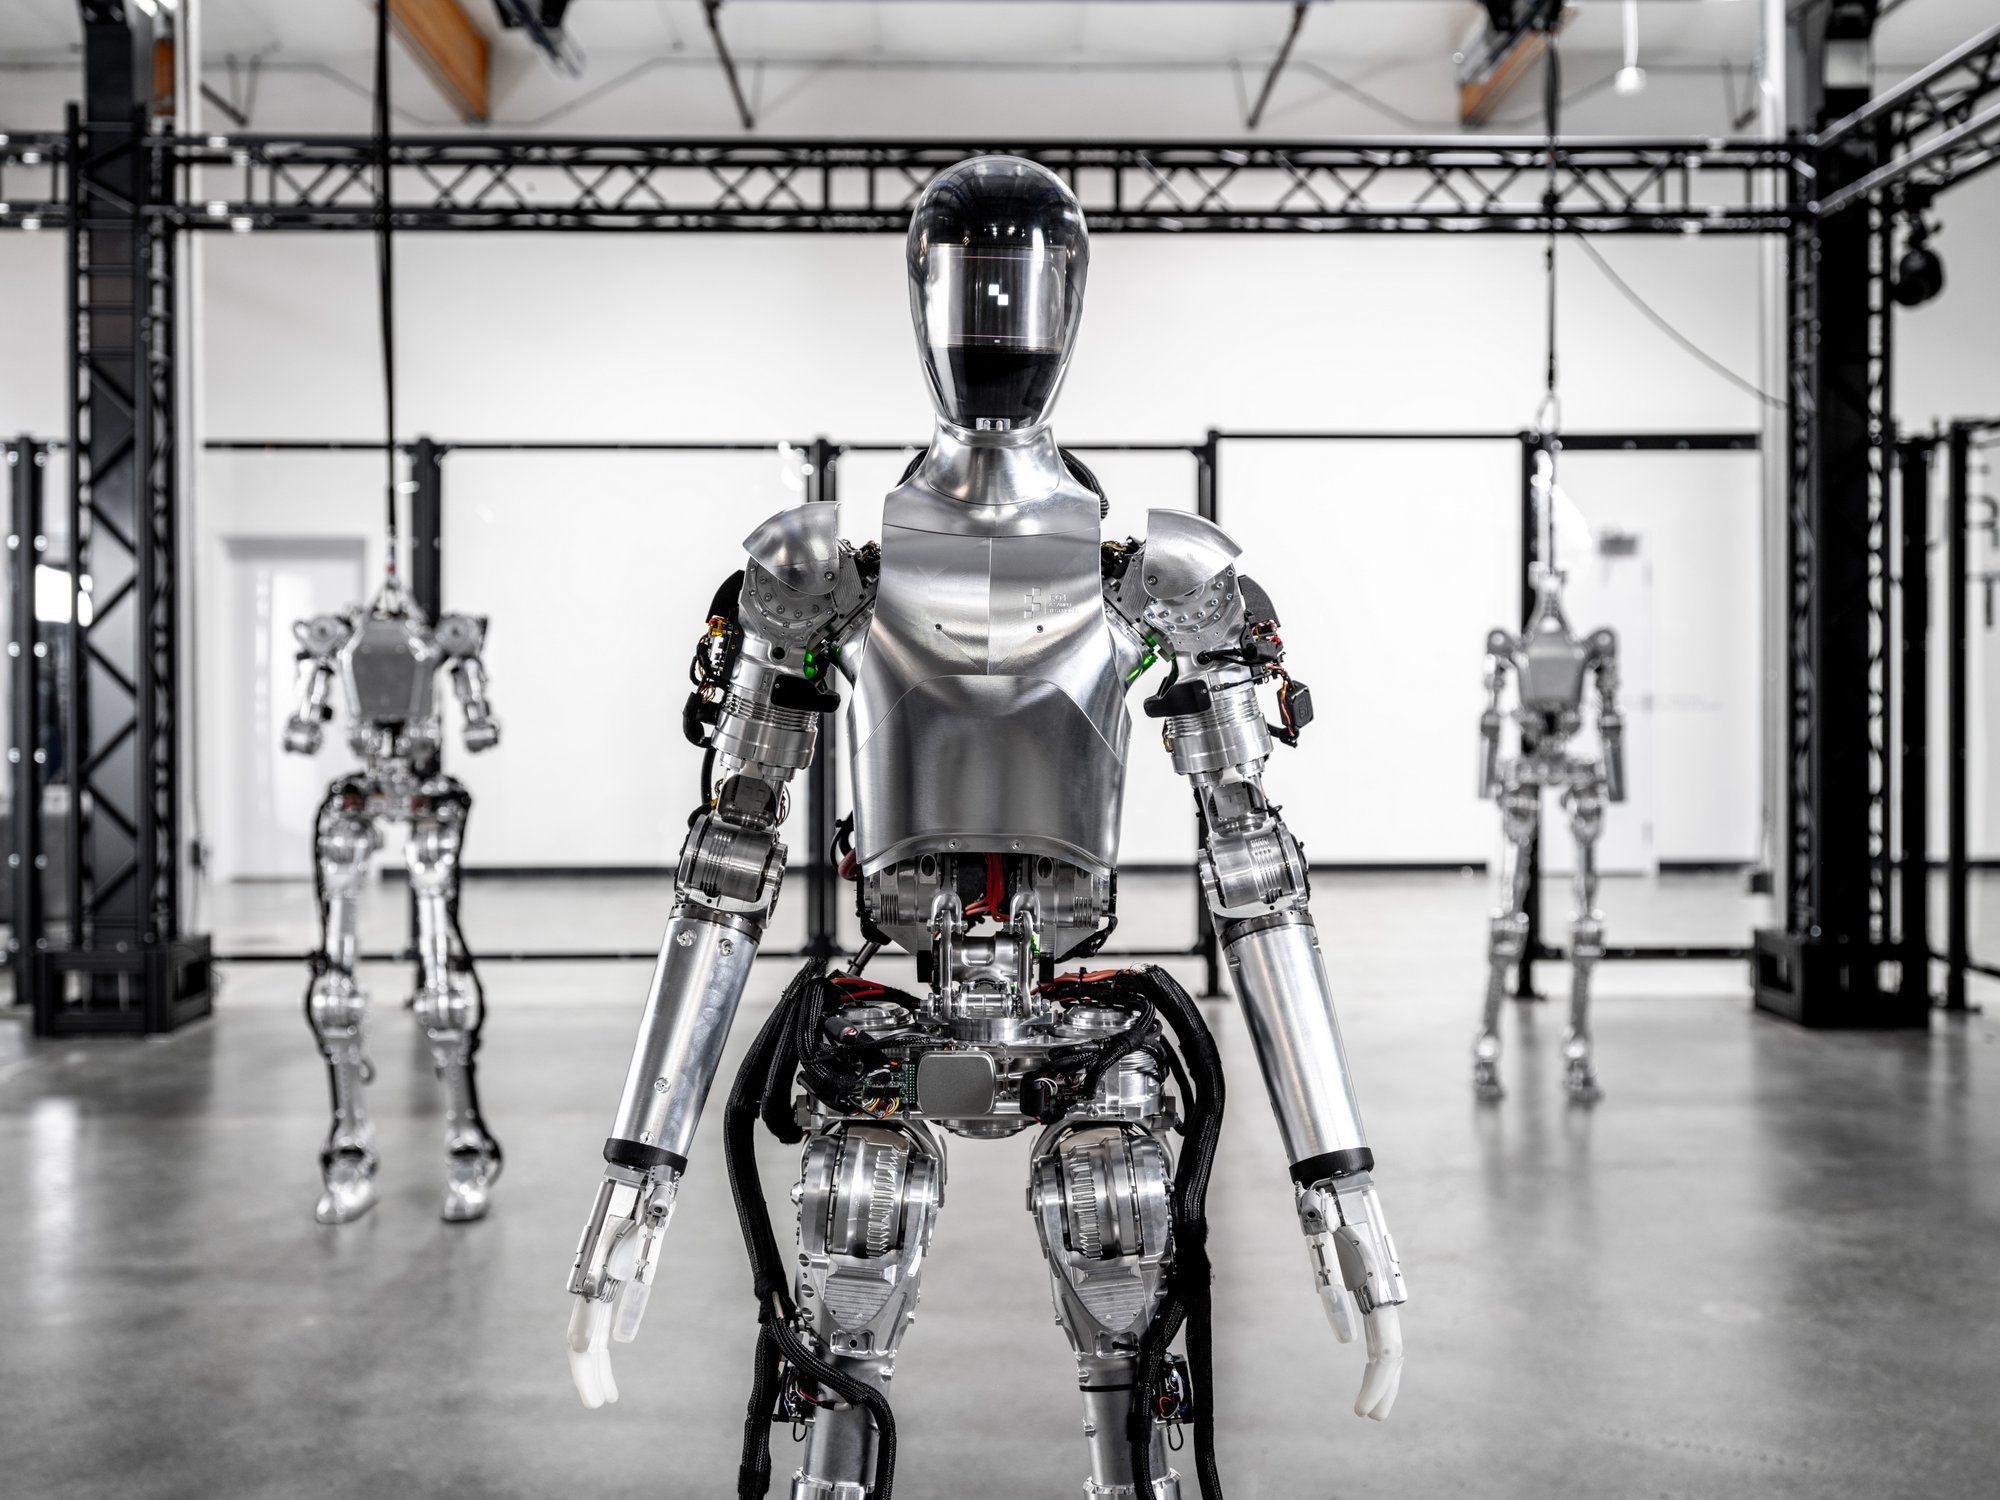 A photograph of a slim humanoid robot standing with reflective metal skin and a black motorcycle helmet.